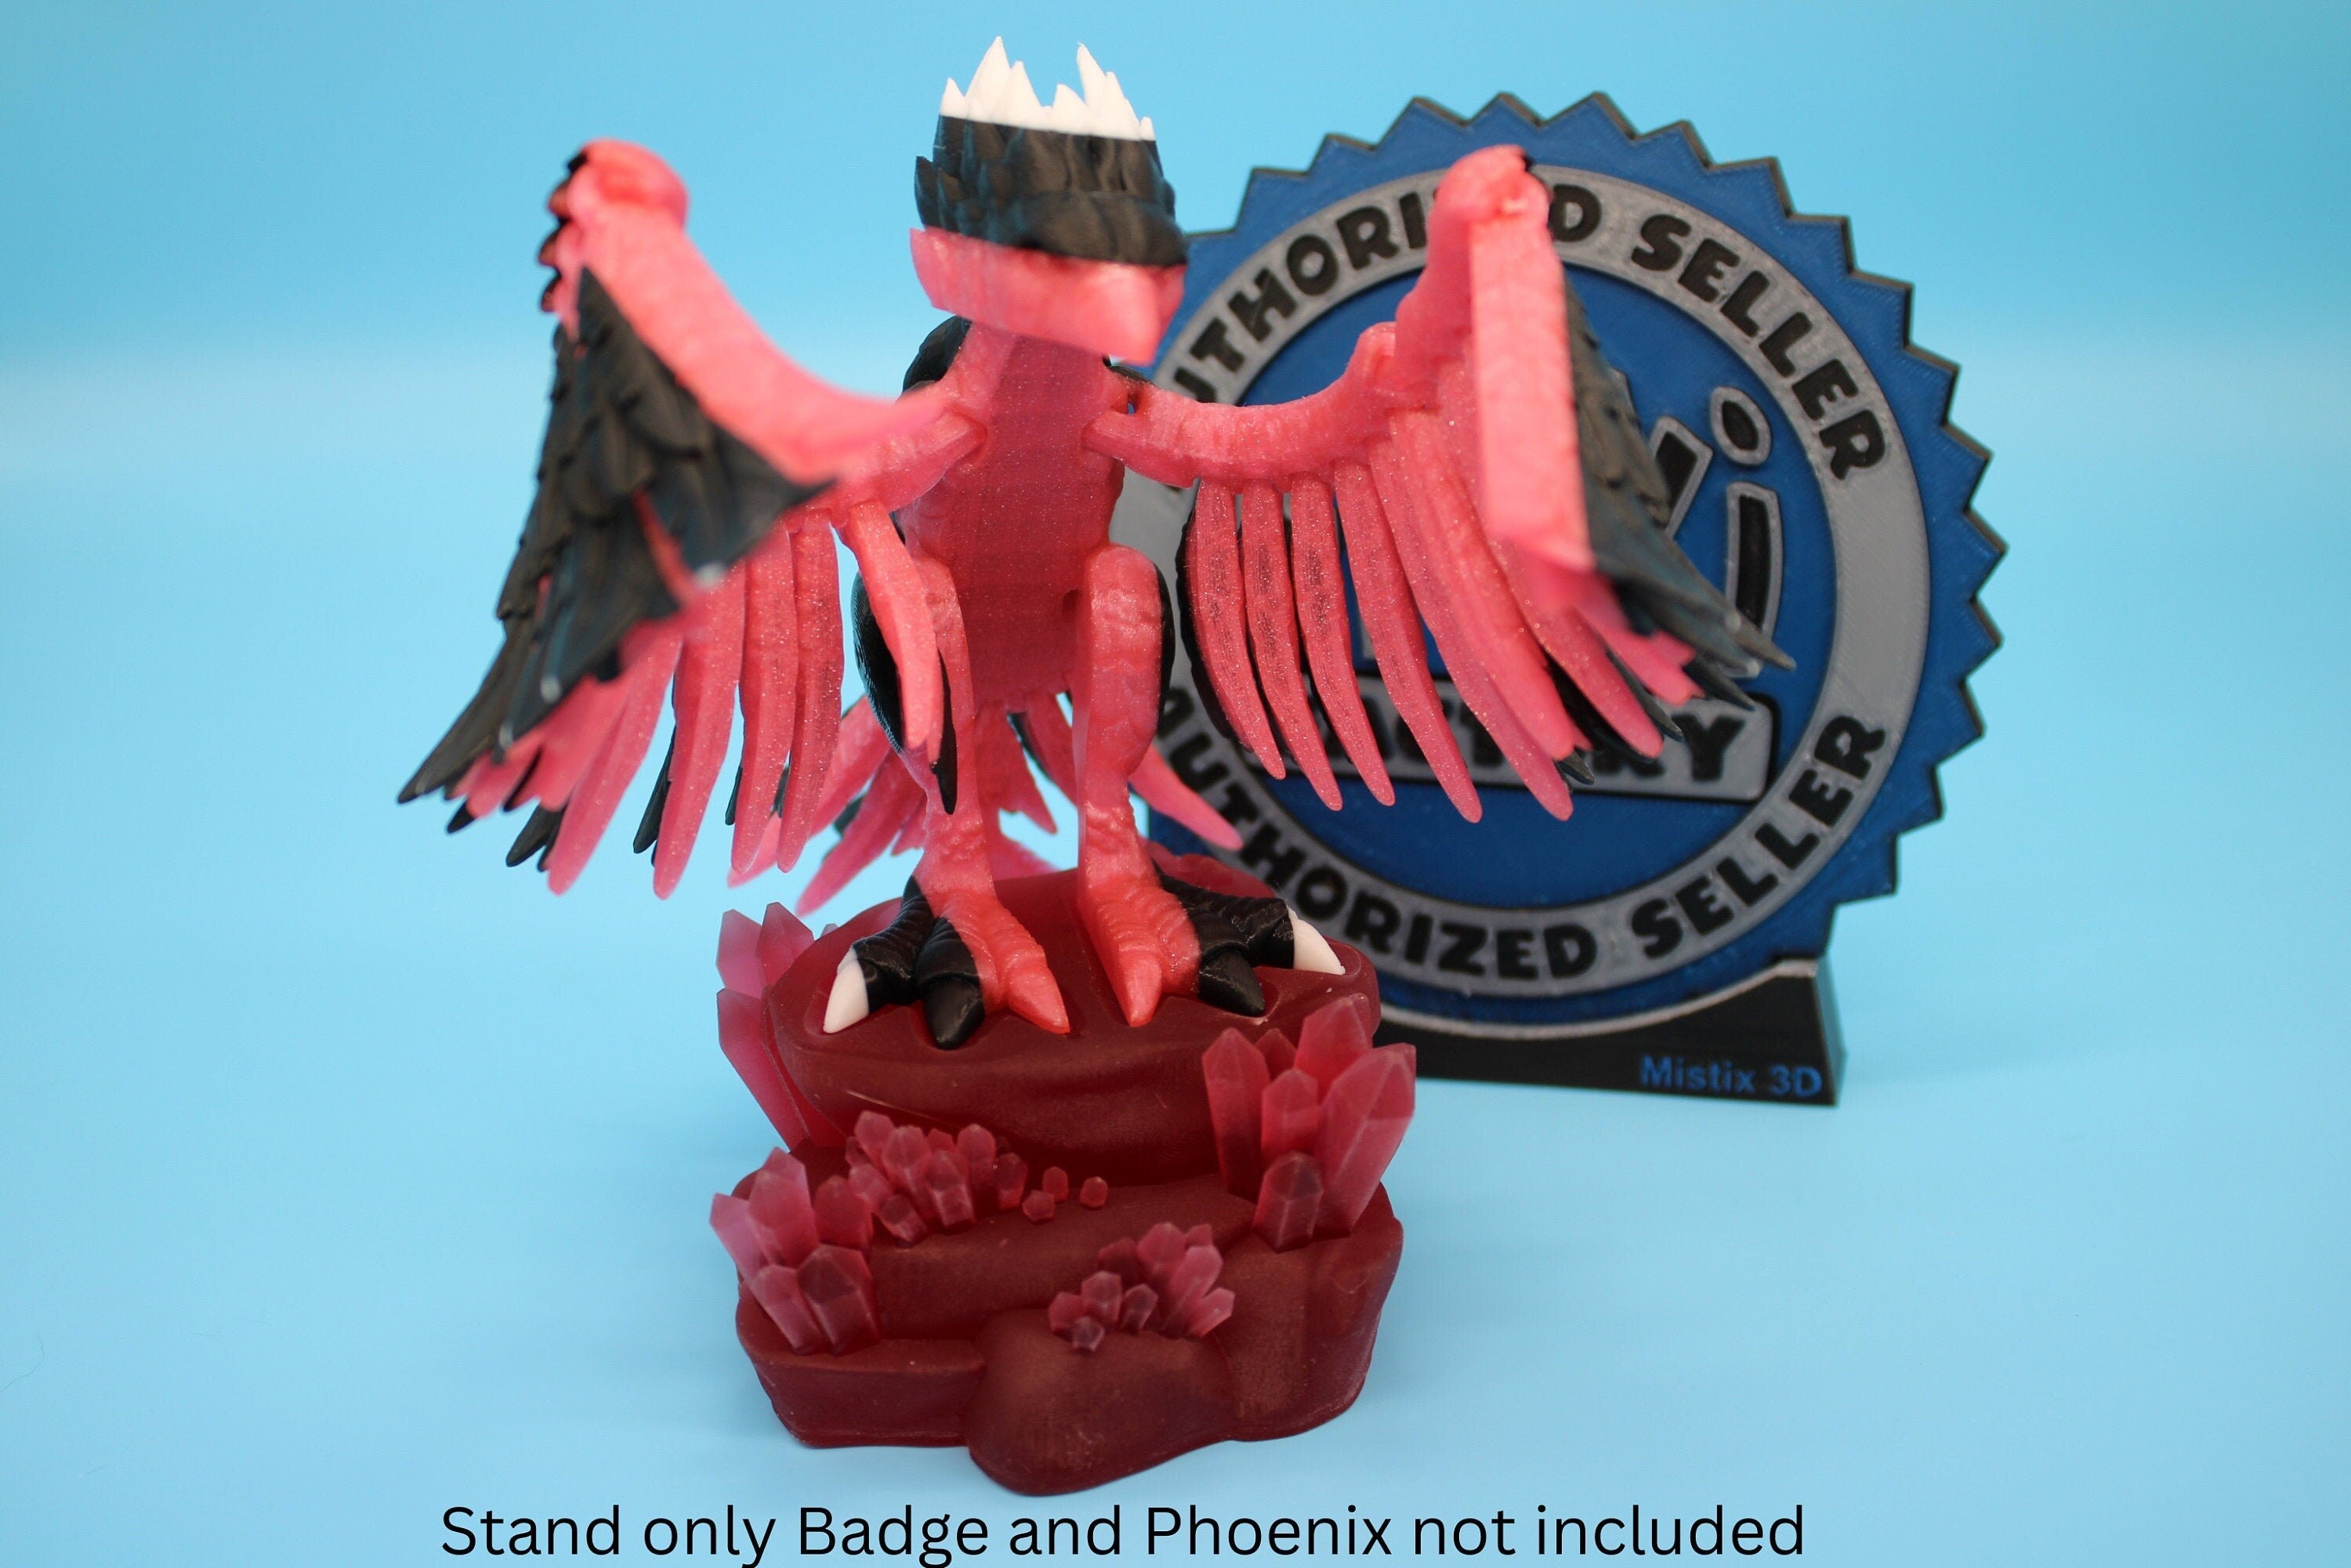 Resin 3D Printed Crystal Stand for Phoenix. Super cute to show off your Phoenix. Display for your favorite Stand only, Phoenix not included